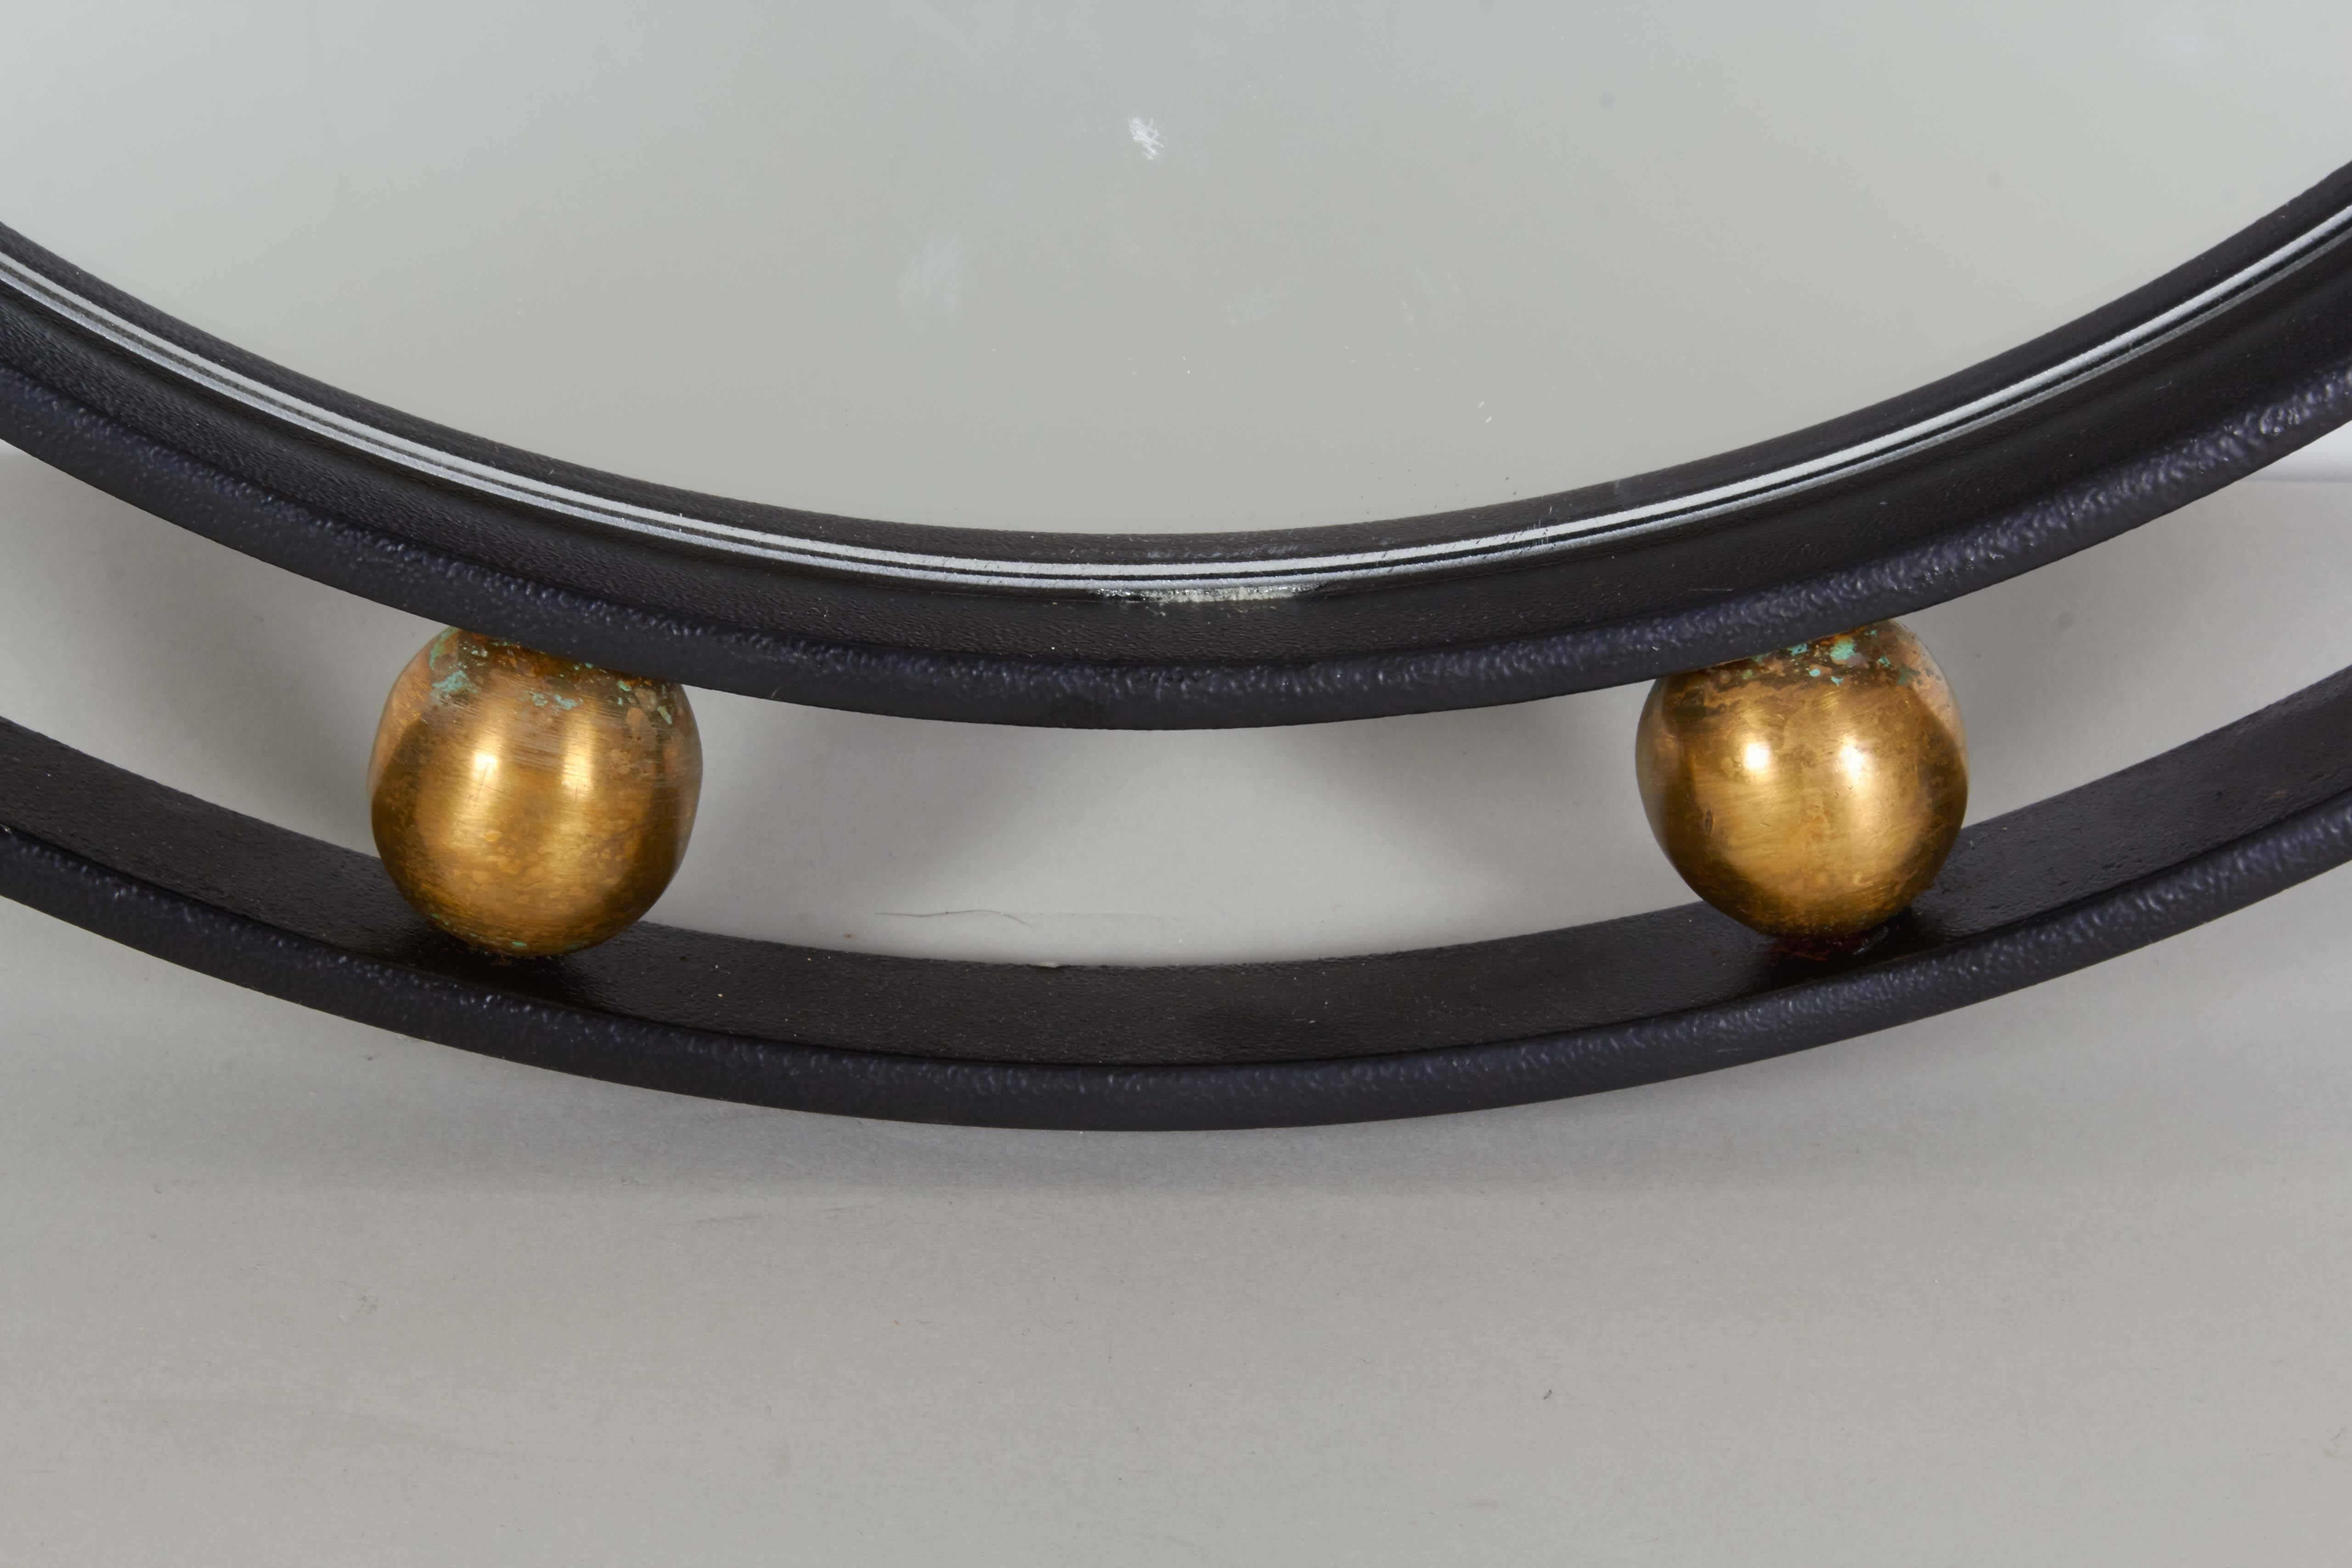 A round wall mirror in French Modern style, the glass set against a frame crafted of black painted wrought iron, accented with brass balls. Good condition, consistent with age and use.

10776.